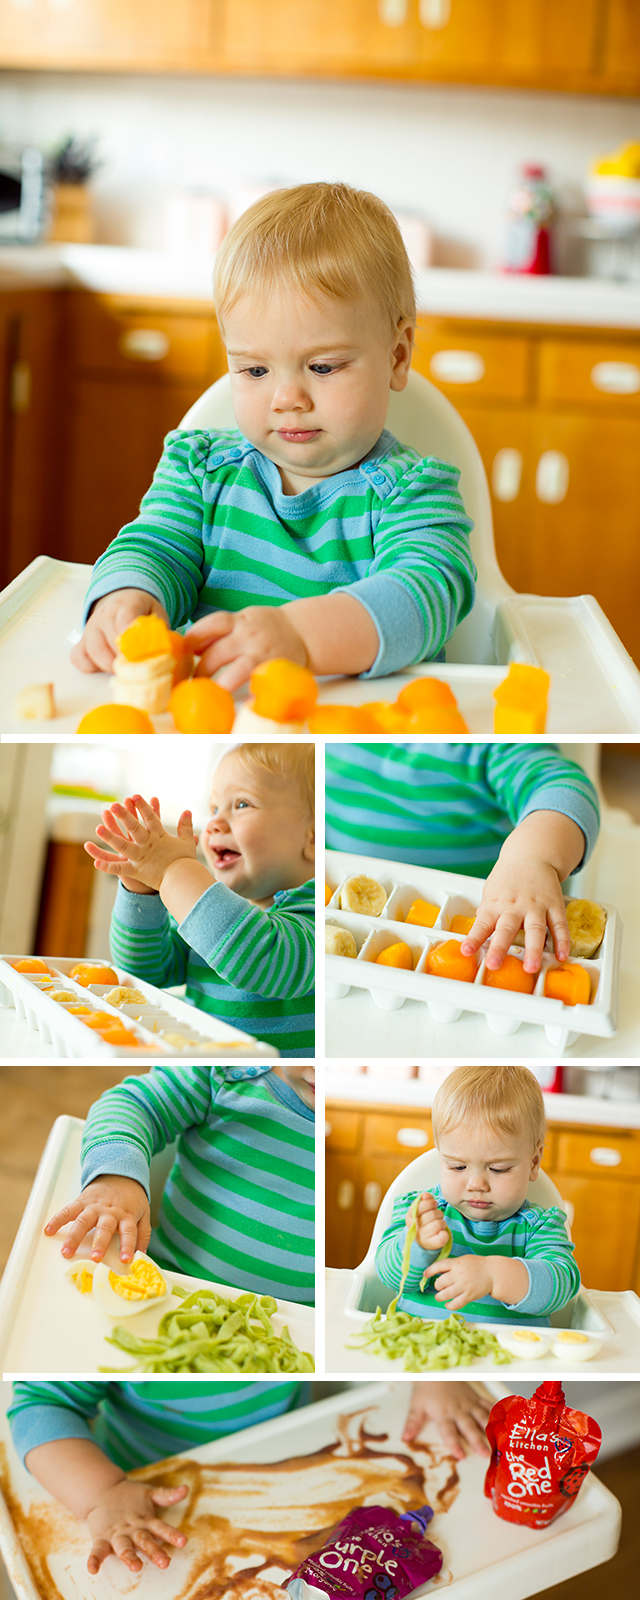 Playtime: Setting Up a Food Exploration Station for Baby - such a great way to get kids used to trying new foods!